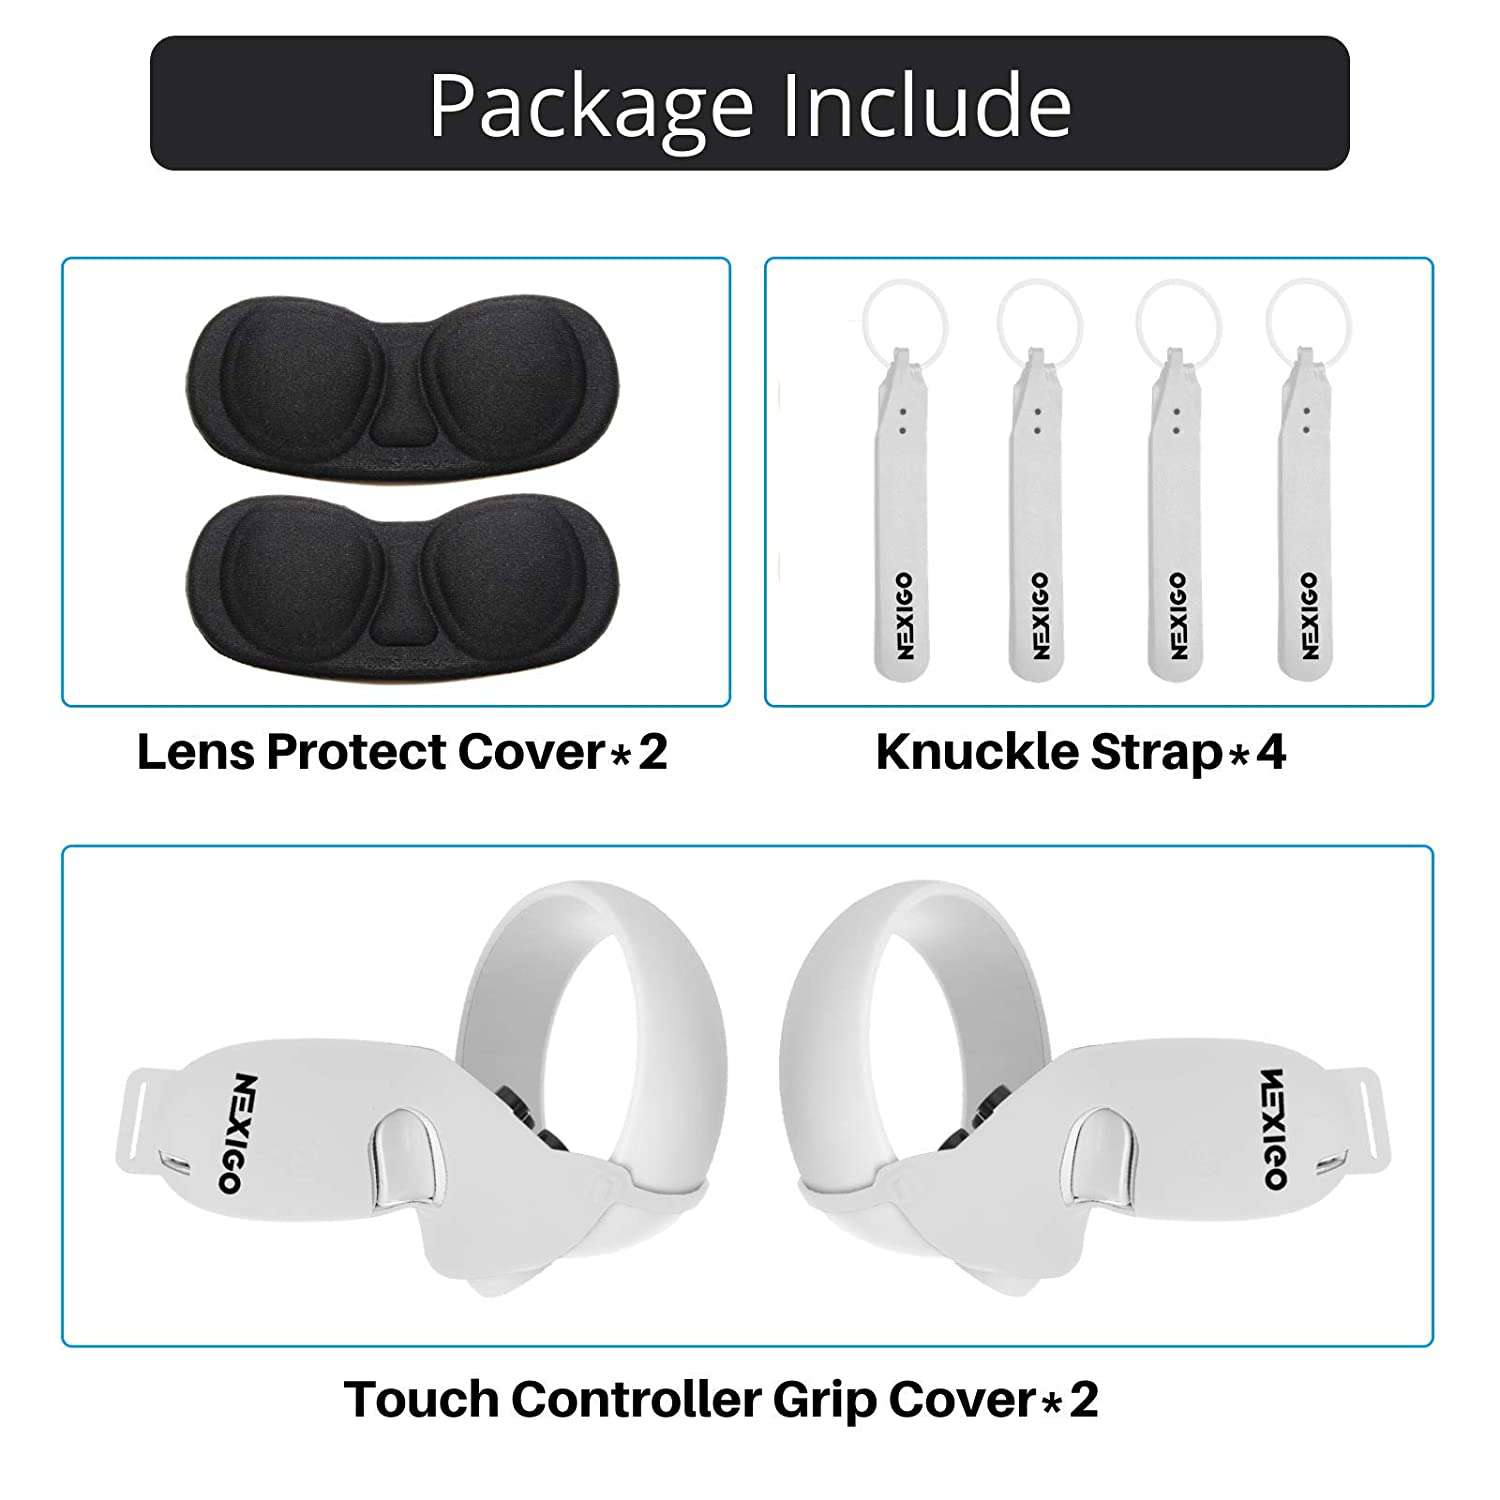 The package includes 2 Lens Protect Covers, 4 Knuckle Straps, and 2 Touch Controller Grip Covers.